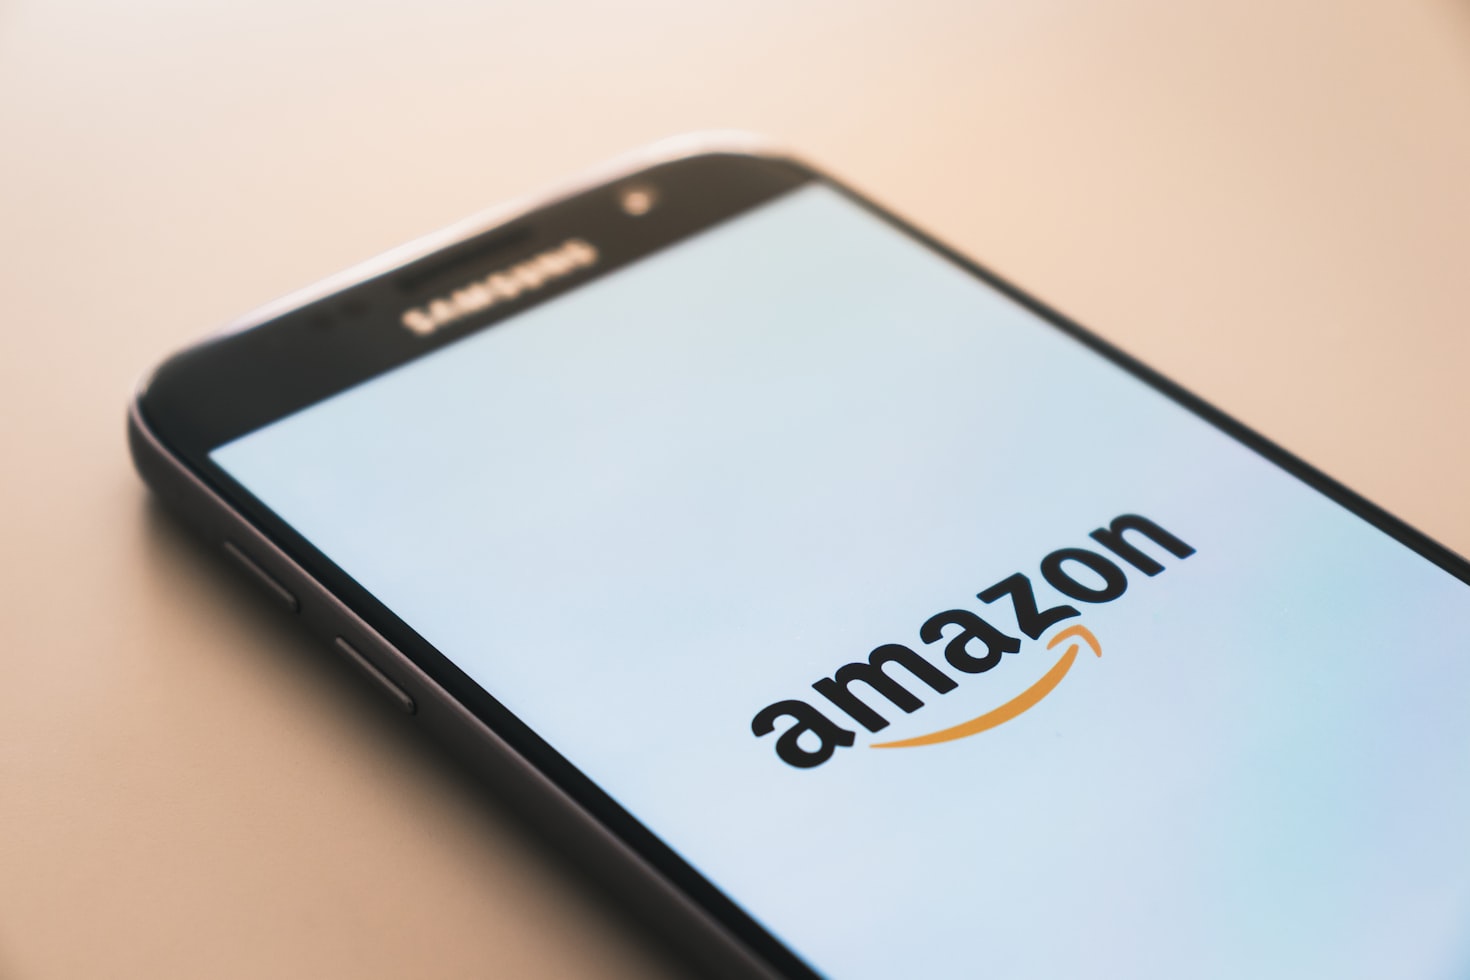 AWS Amazon interview questions on a phone